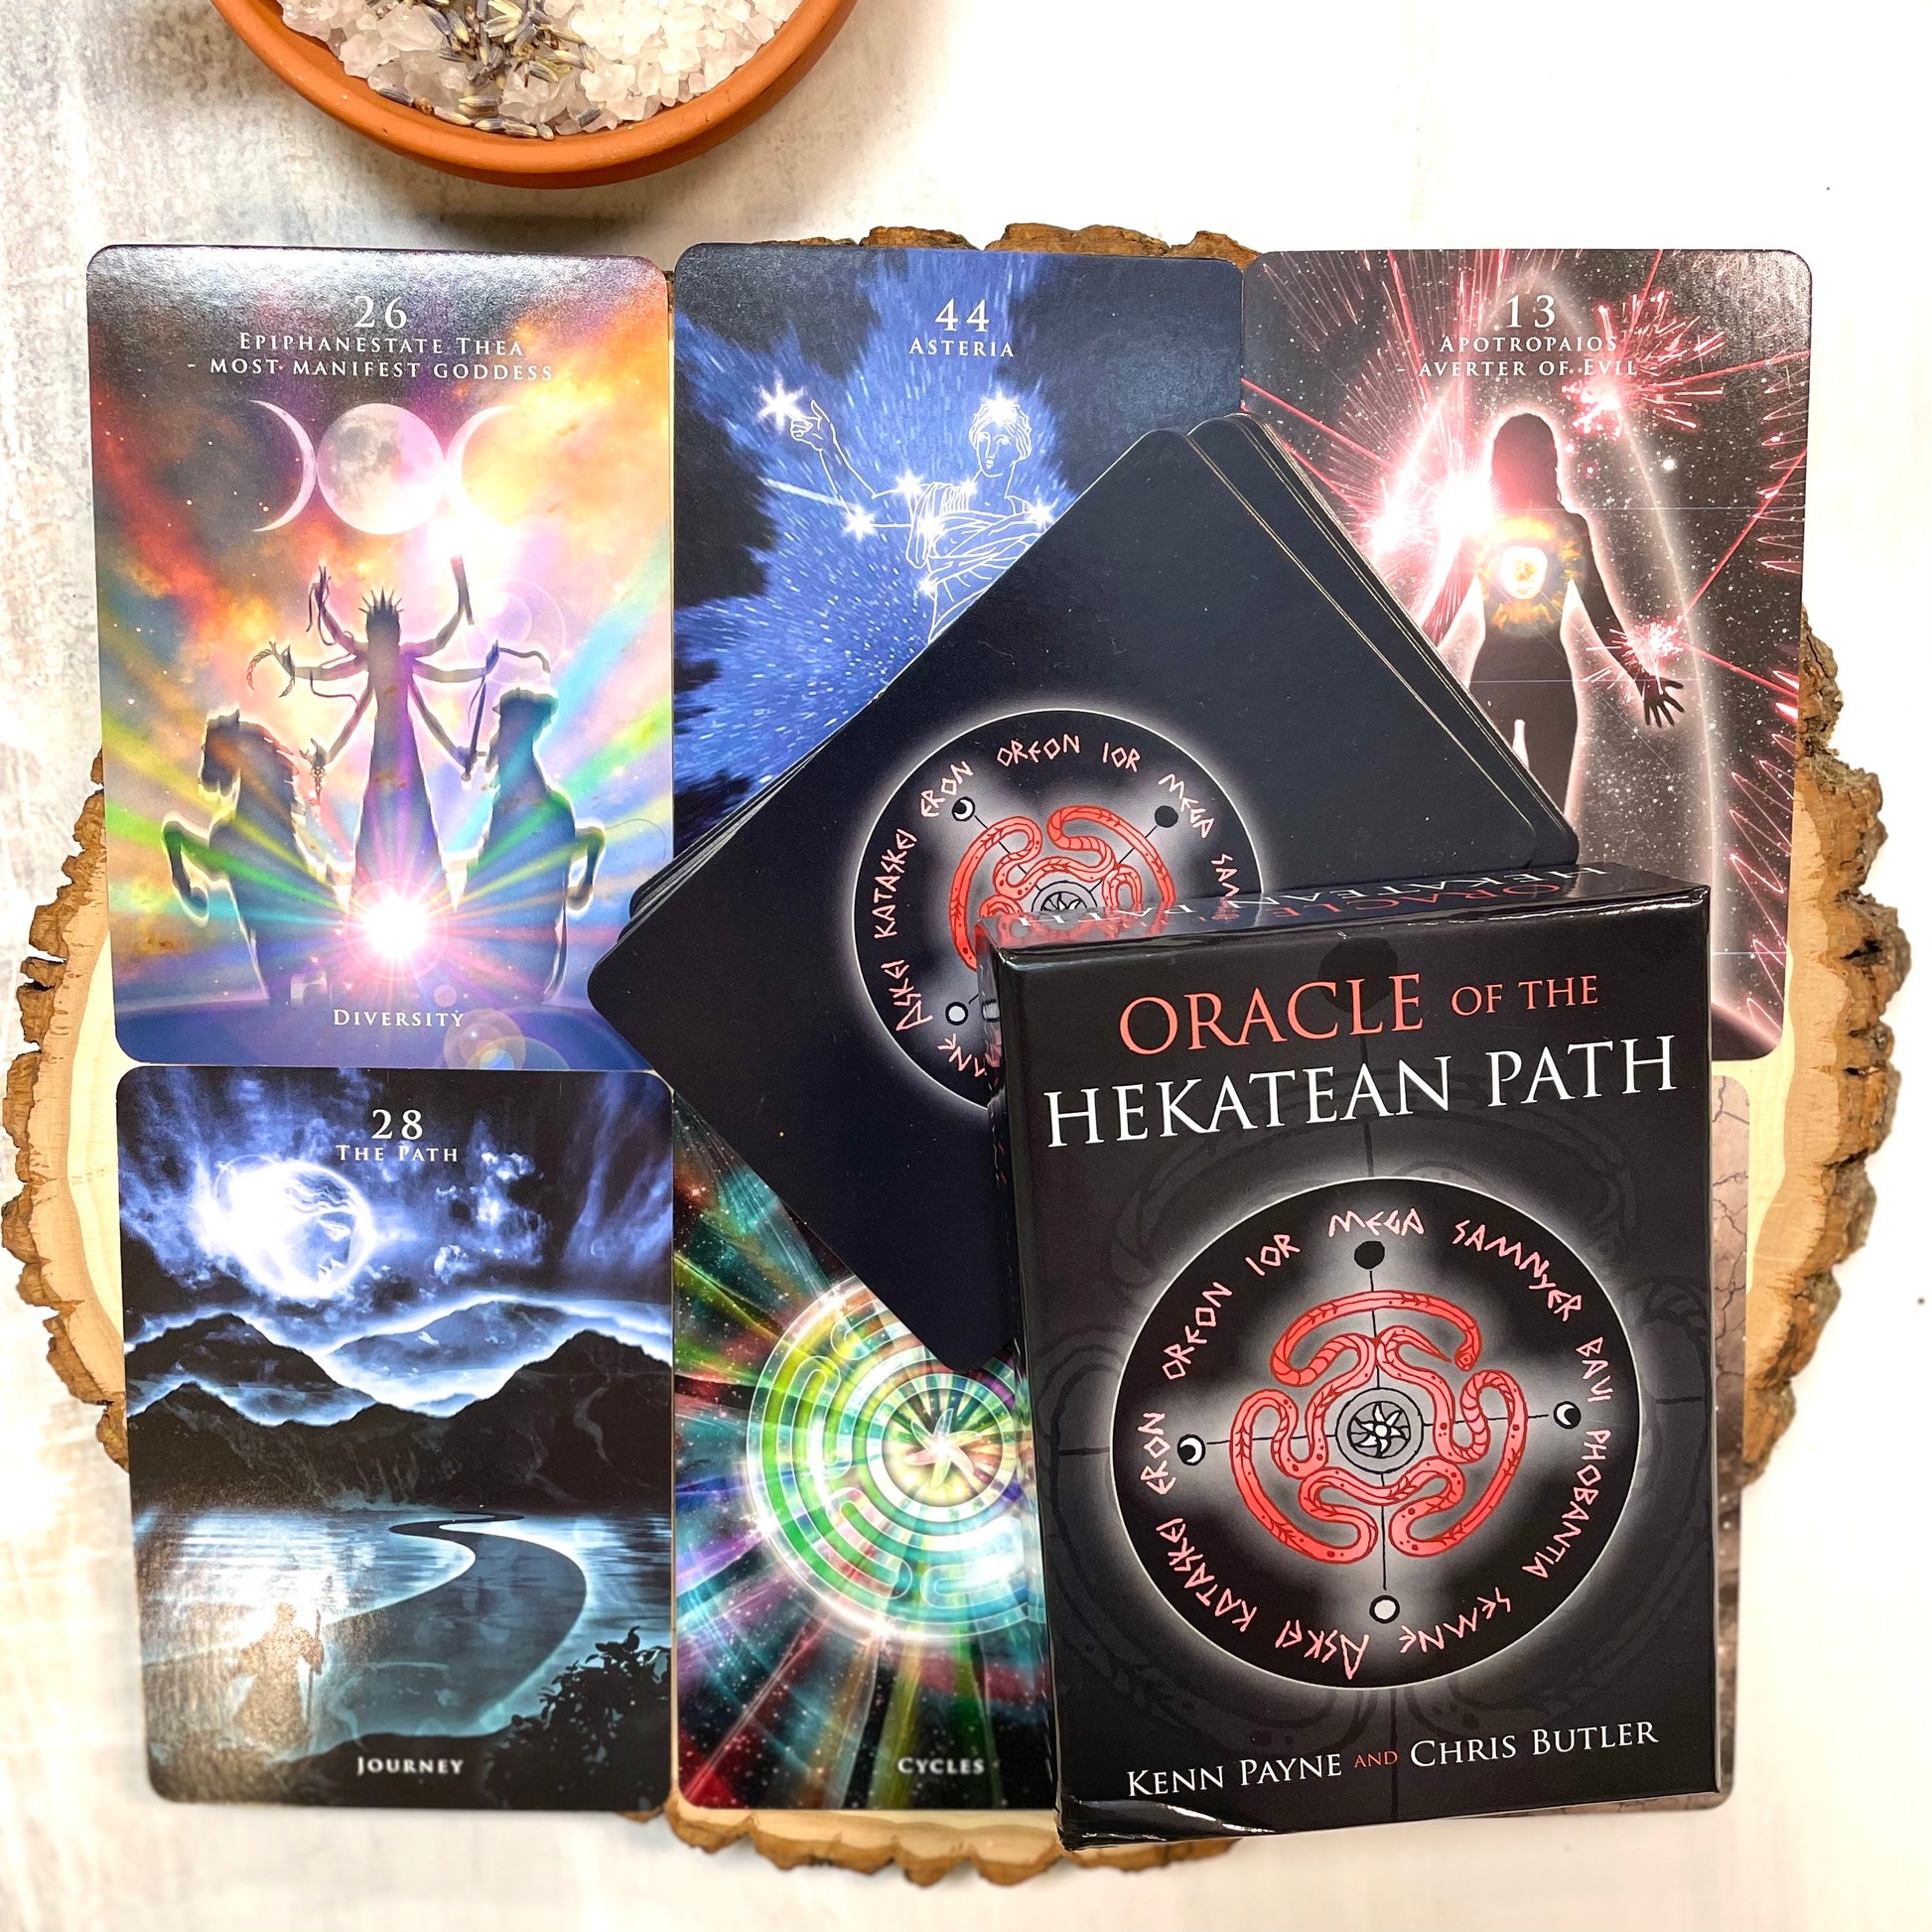 Oracle of the Hekatean Path by Kenn Payne (Author), Christopher Butler (Author)